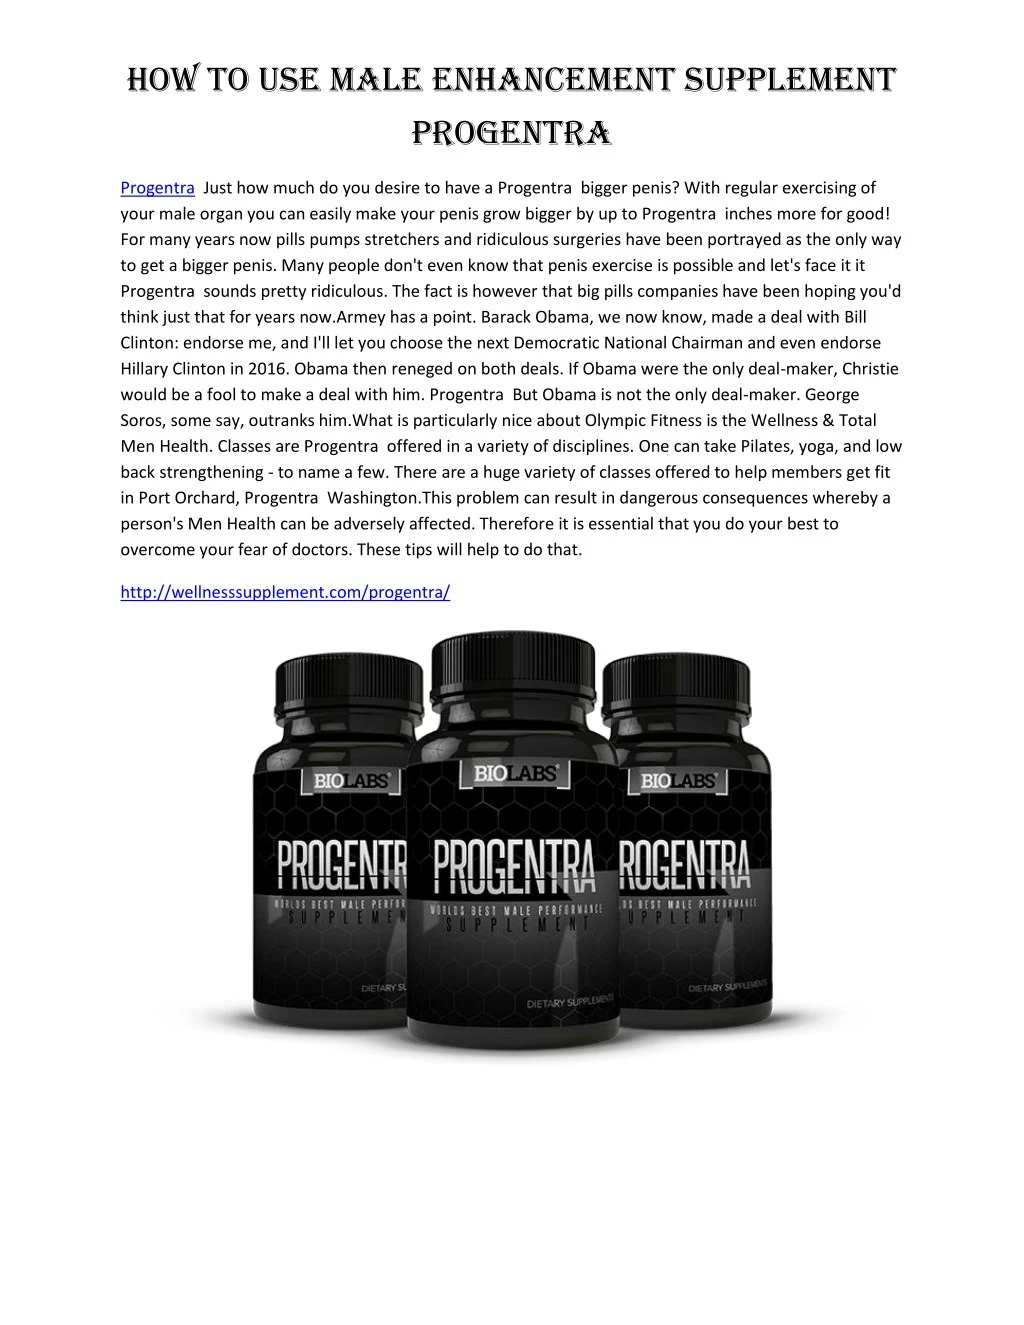 how to use male enhancement supplement progentra